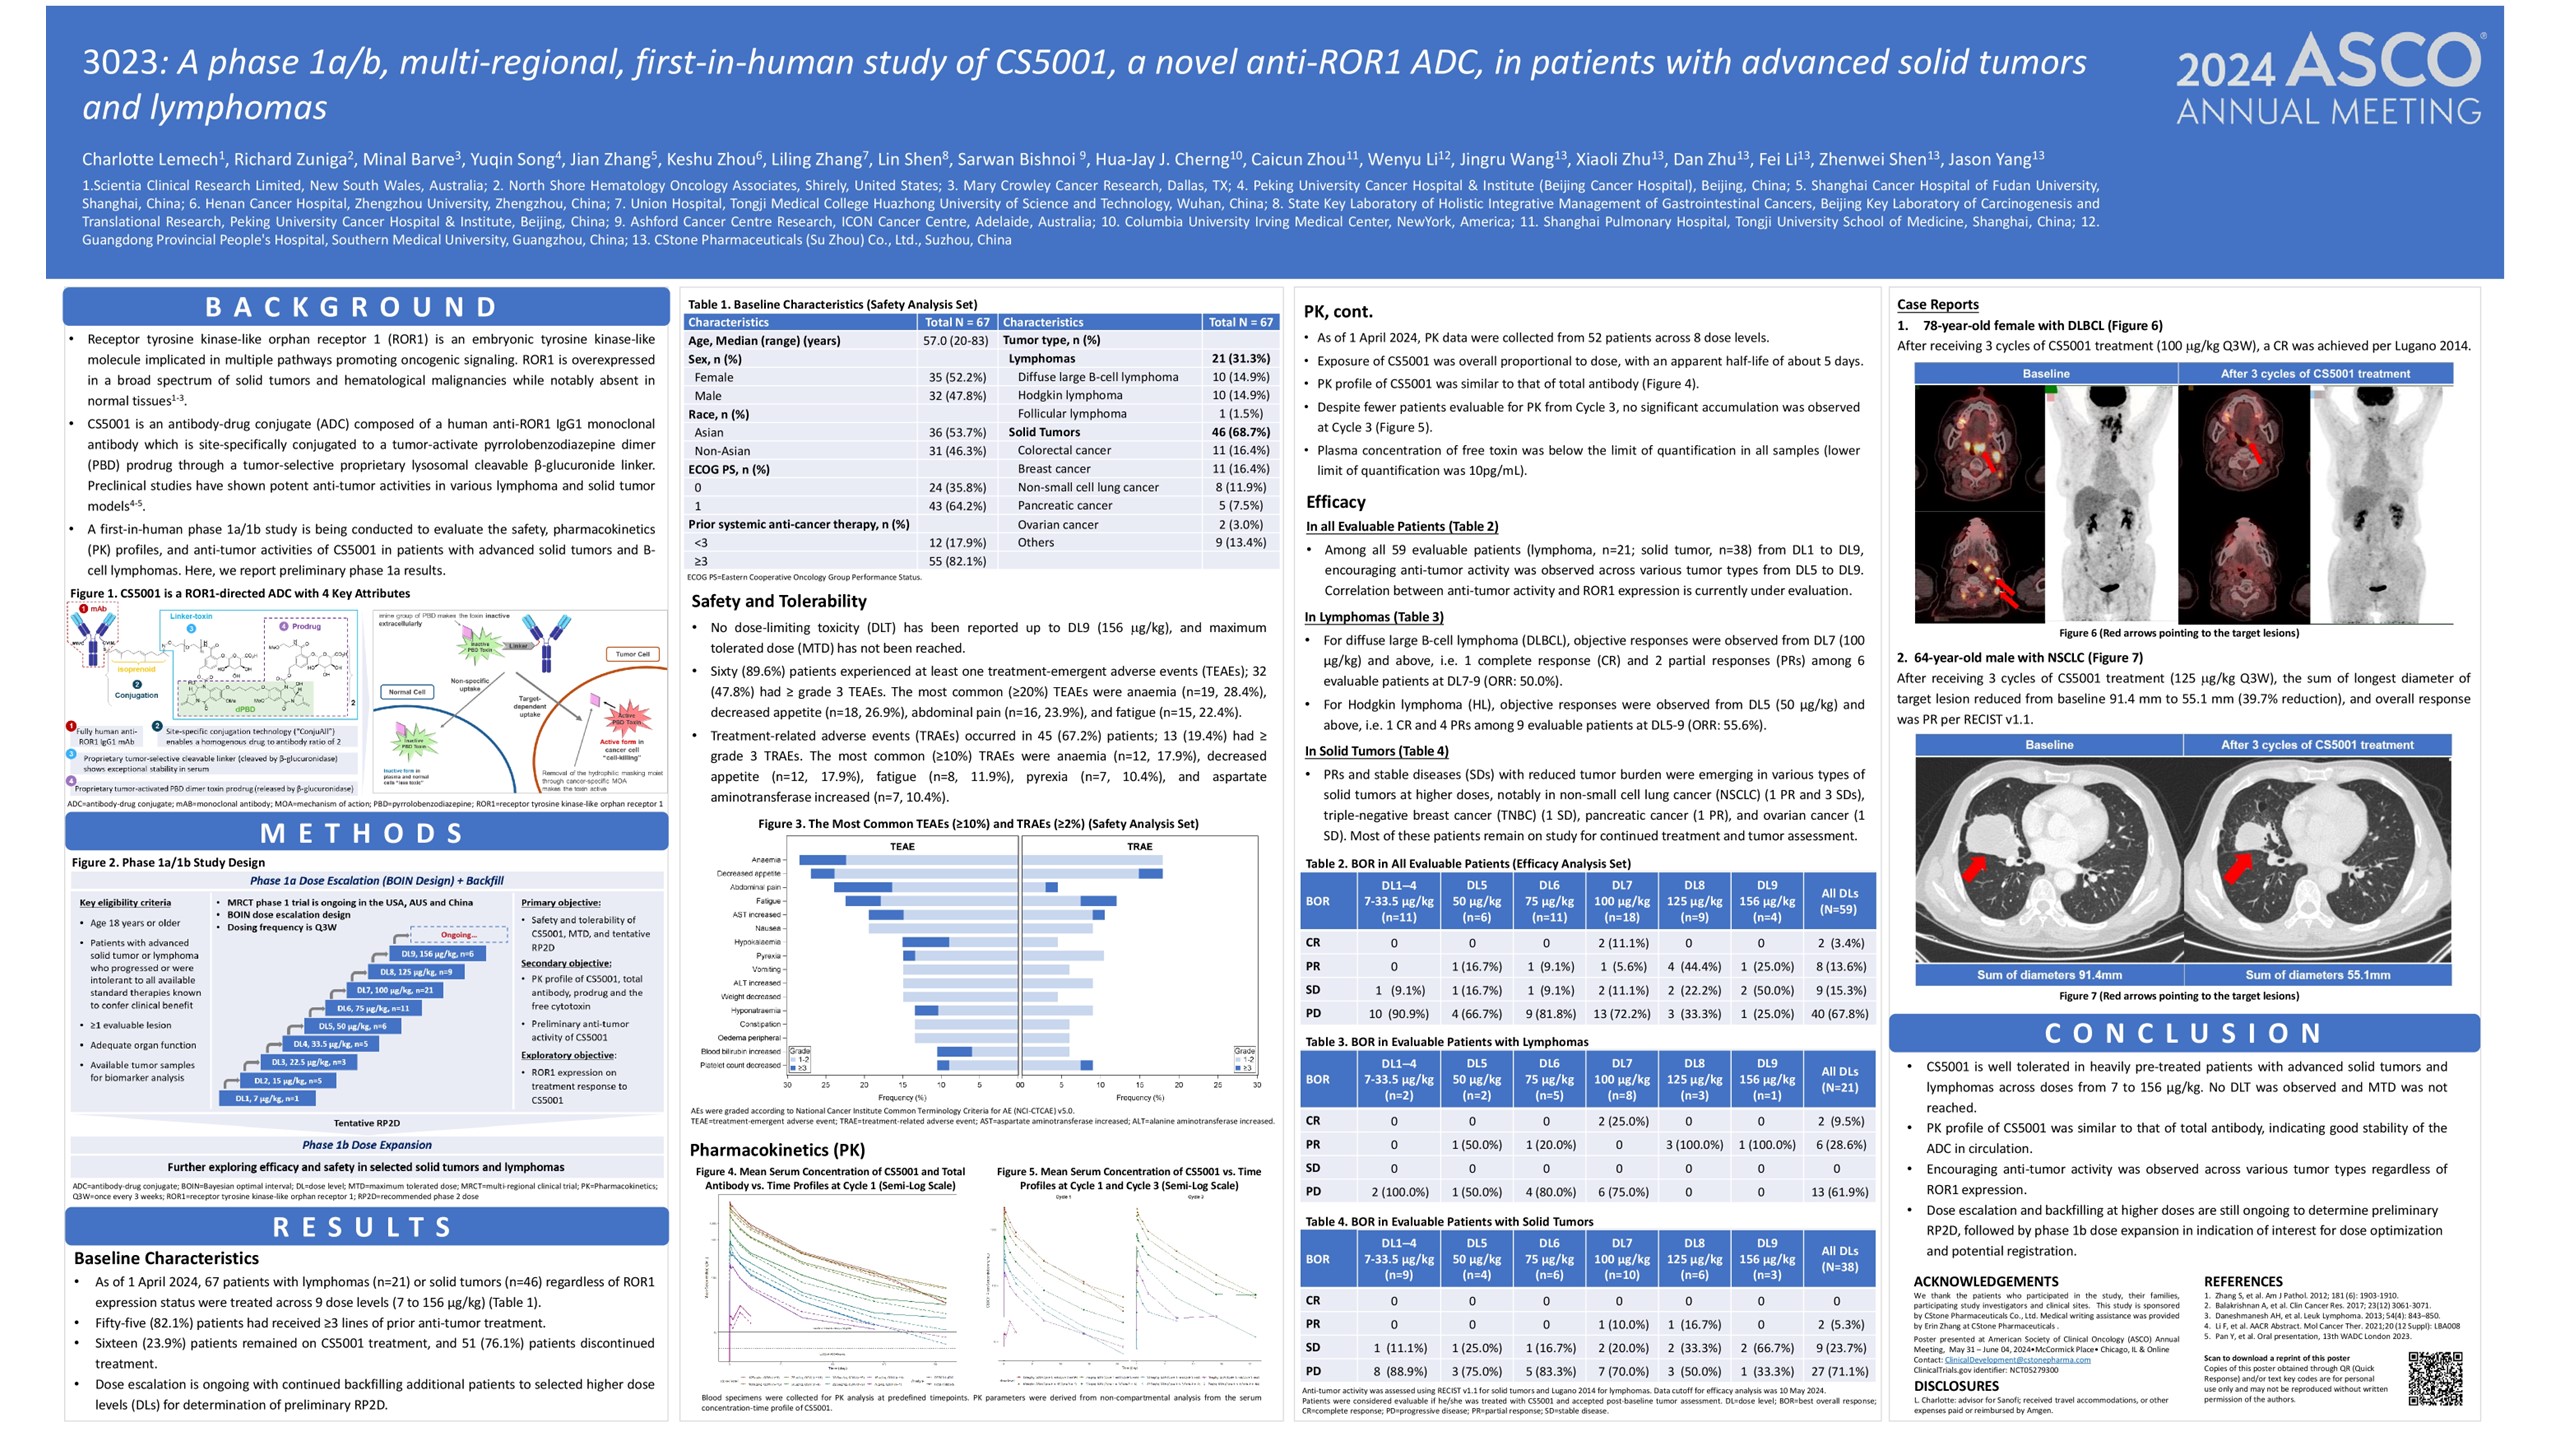 A phase 1a/b, multi-regional, first-in-human study of CS5001, a novel anti-ROR1 ADC, in patients with advanced solid tumors and lymphomas.